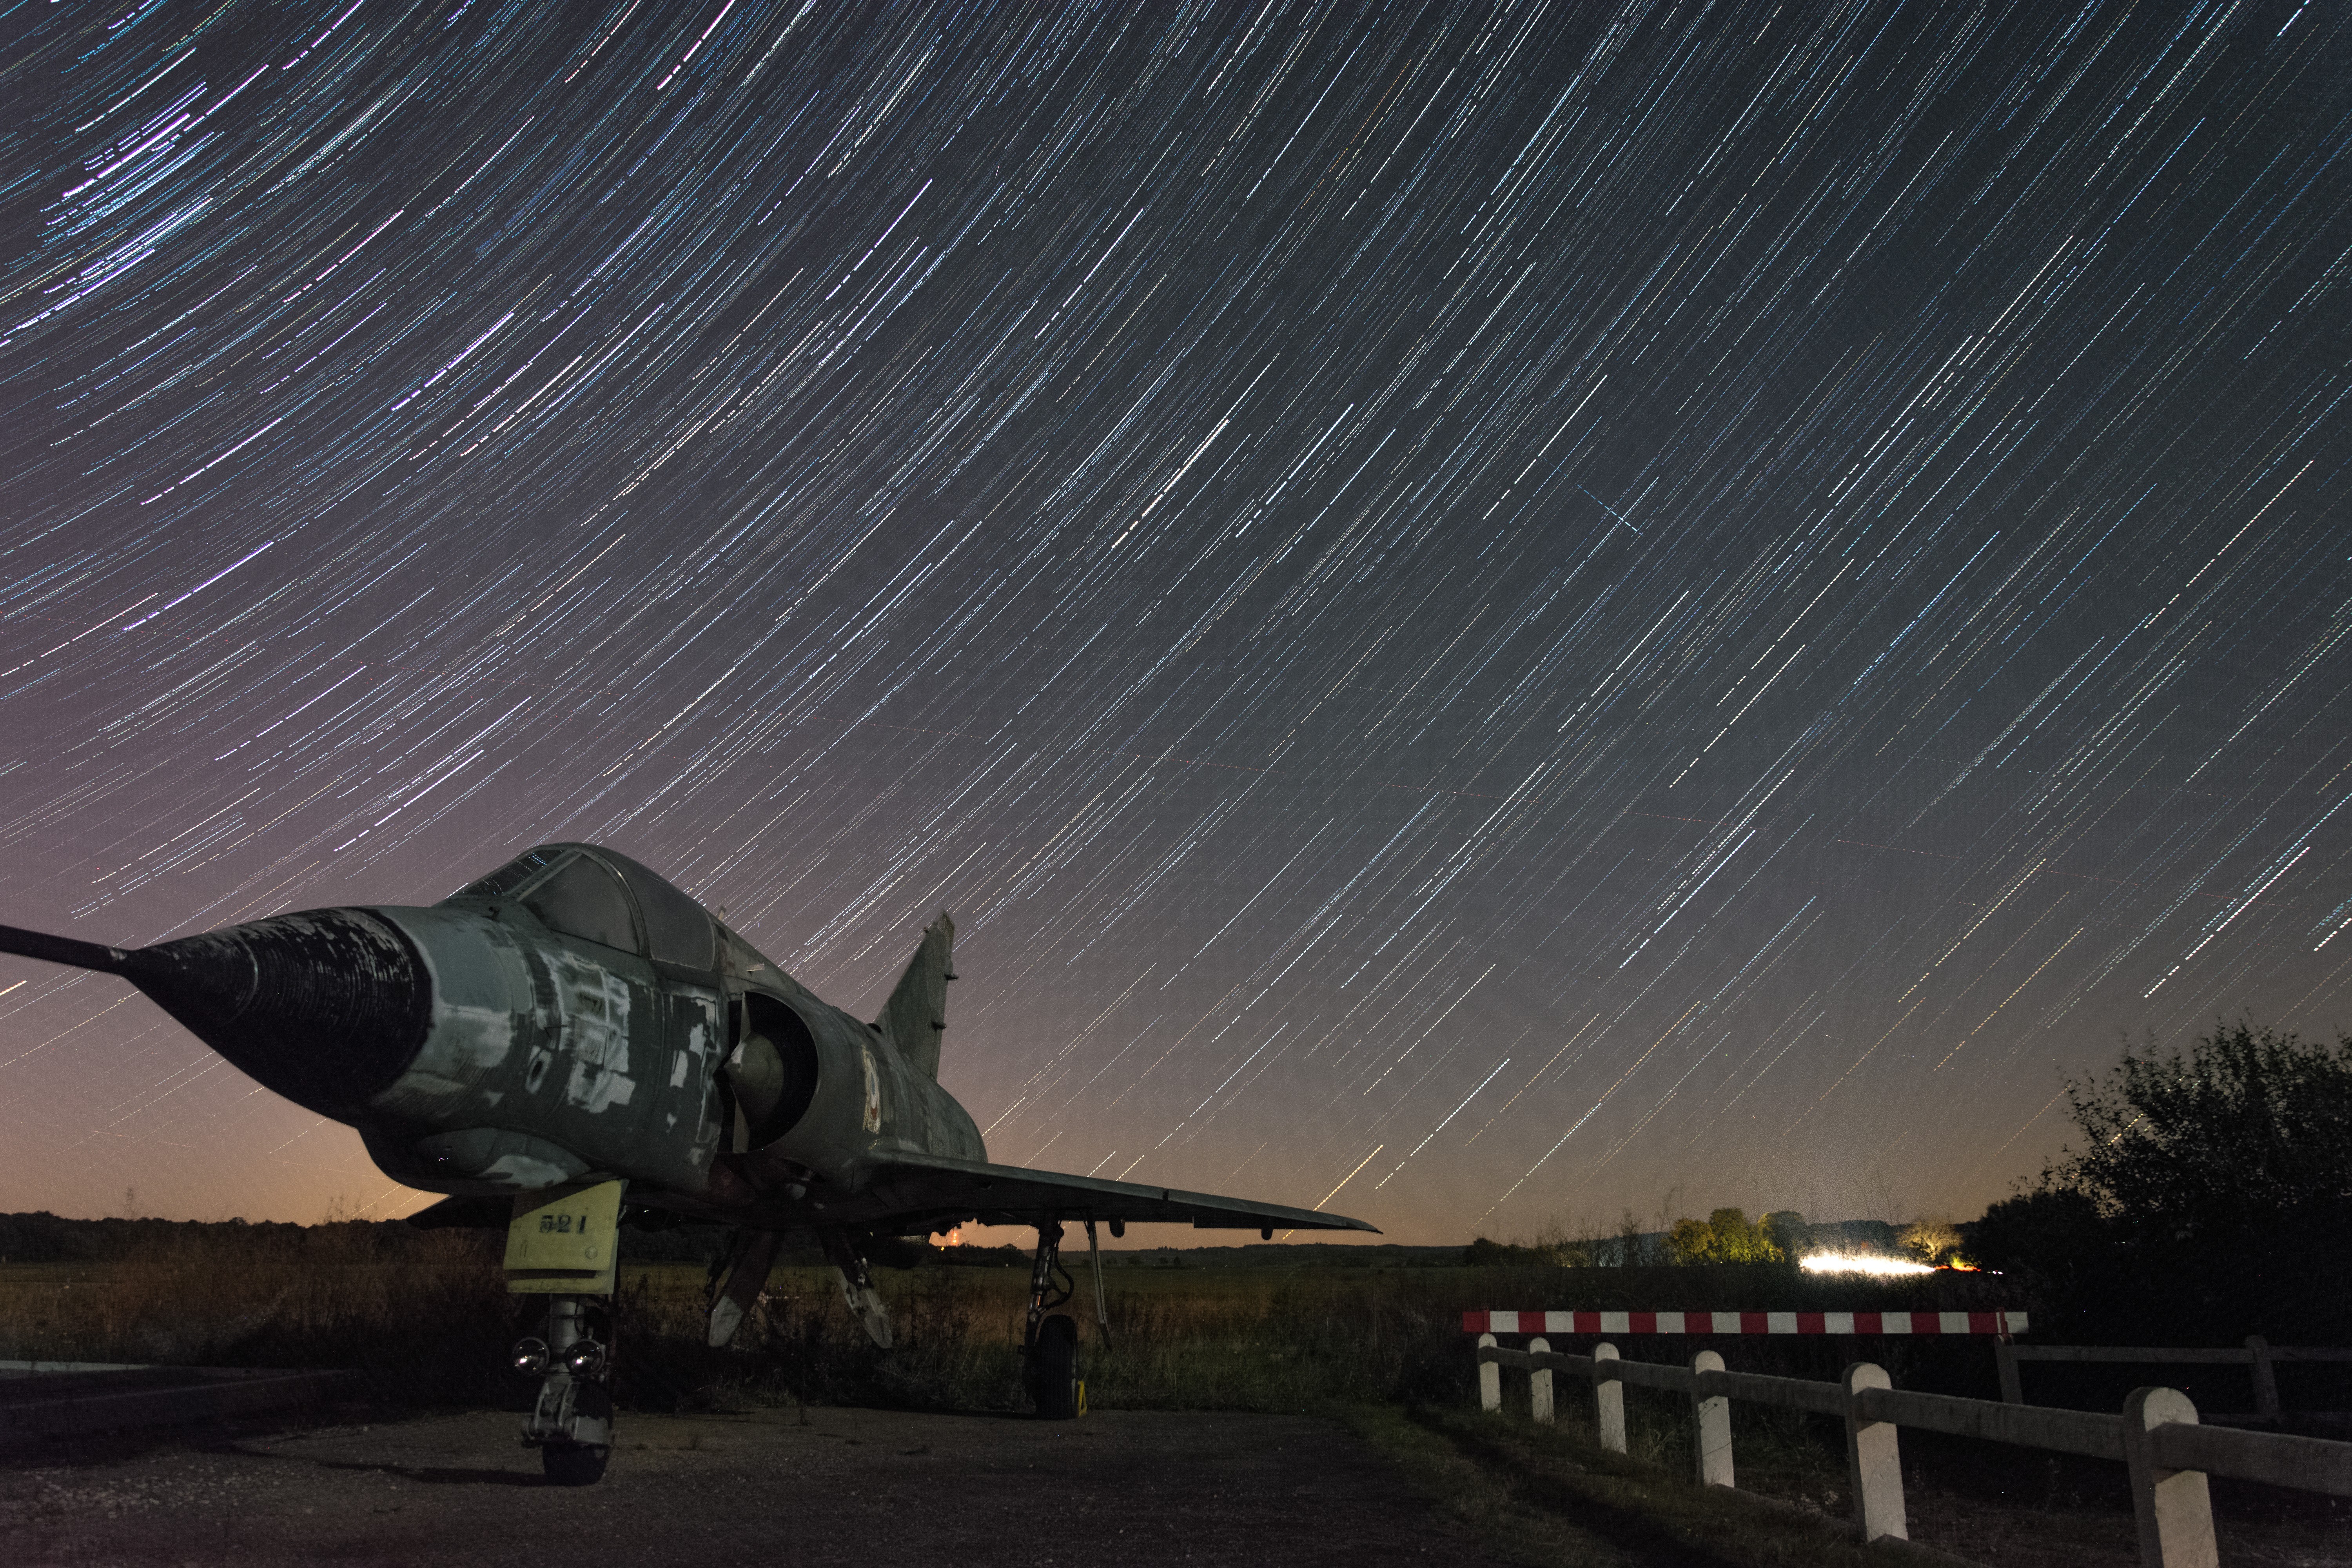 General 6000x4000 military aircraft vehicle old aircraft long exposure night sky star trails military vehicle Dassault Mirage 2000 wreck sky stars military